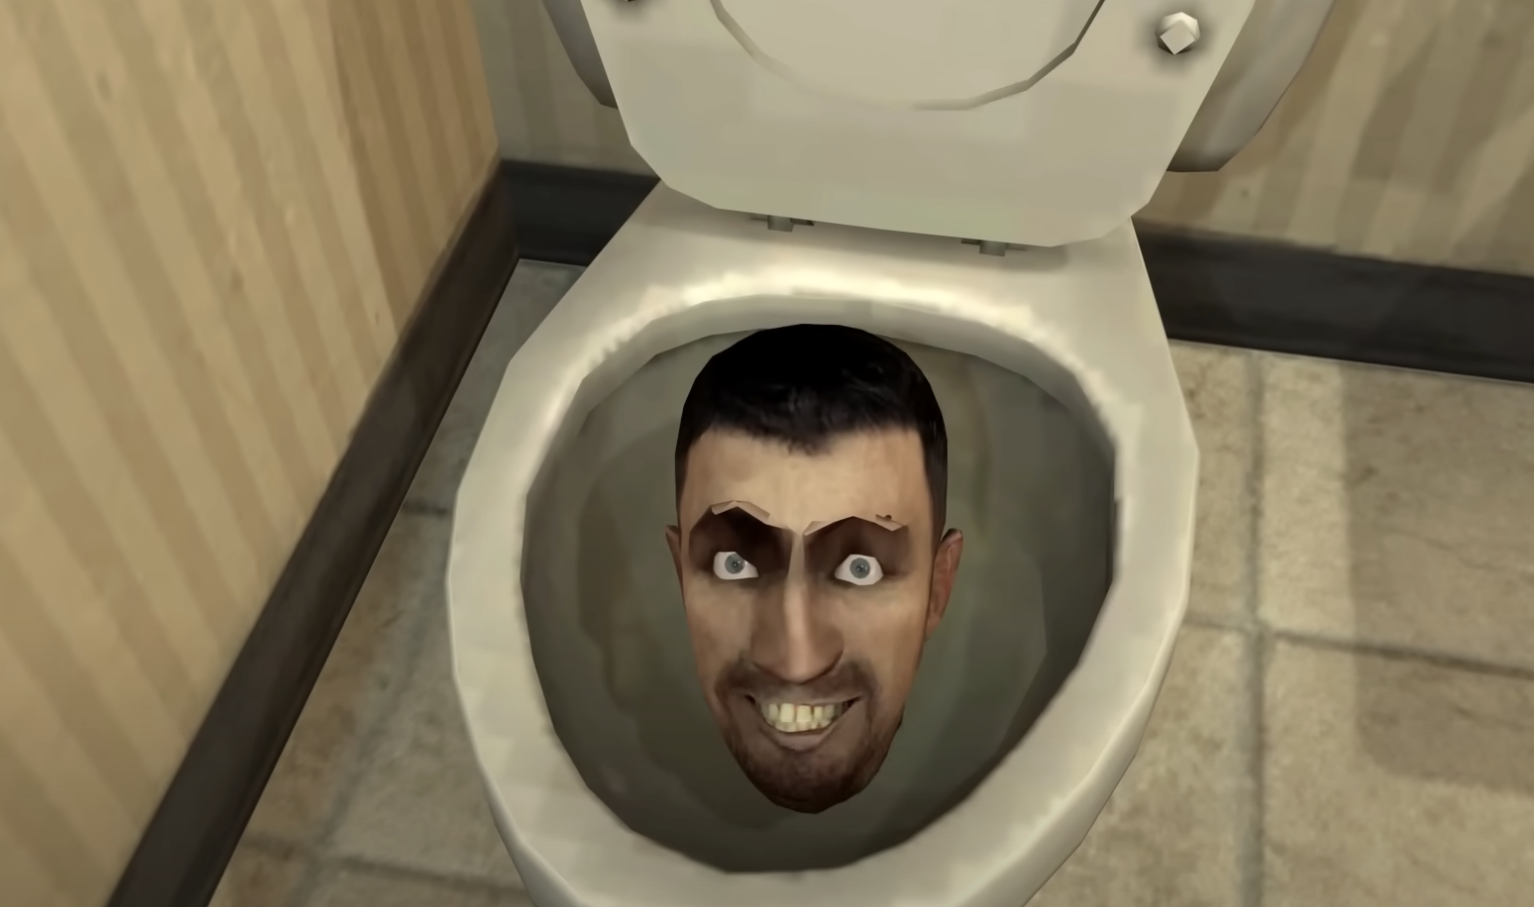 A cartoonish, grinning man&#x27;s head appears inside a toilet bowl in a bathroom setting